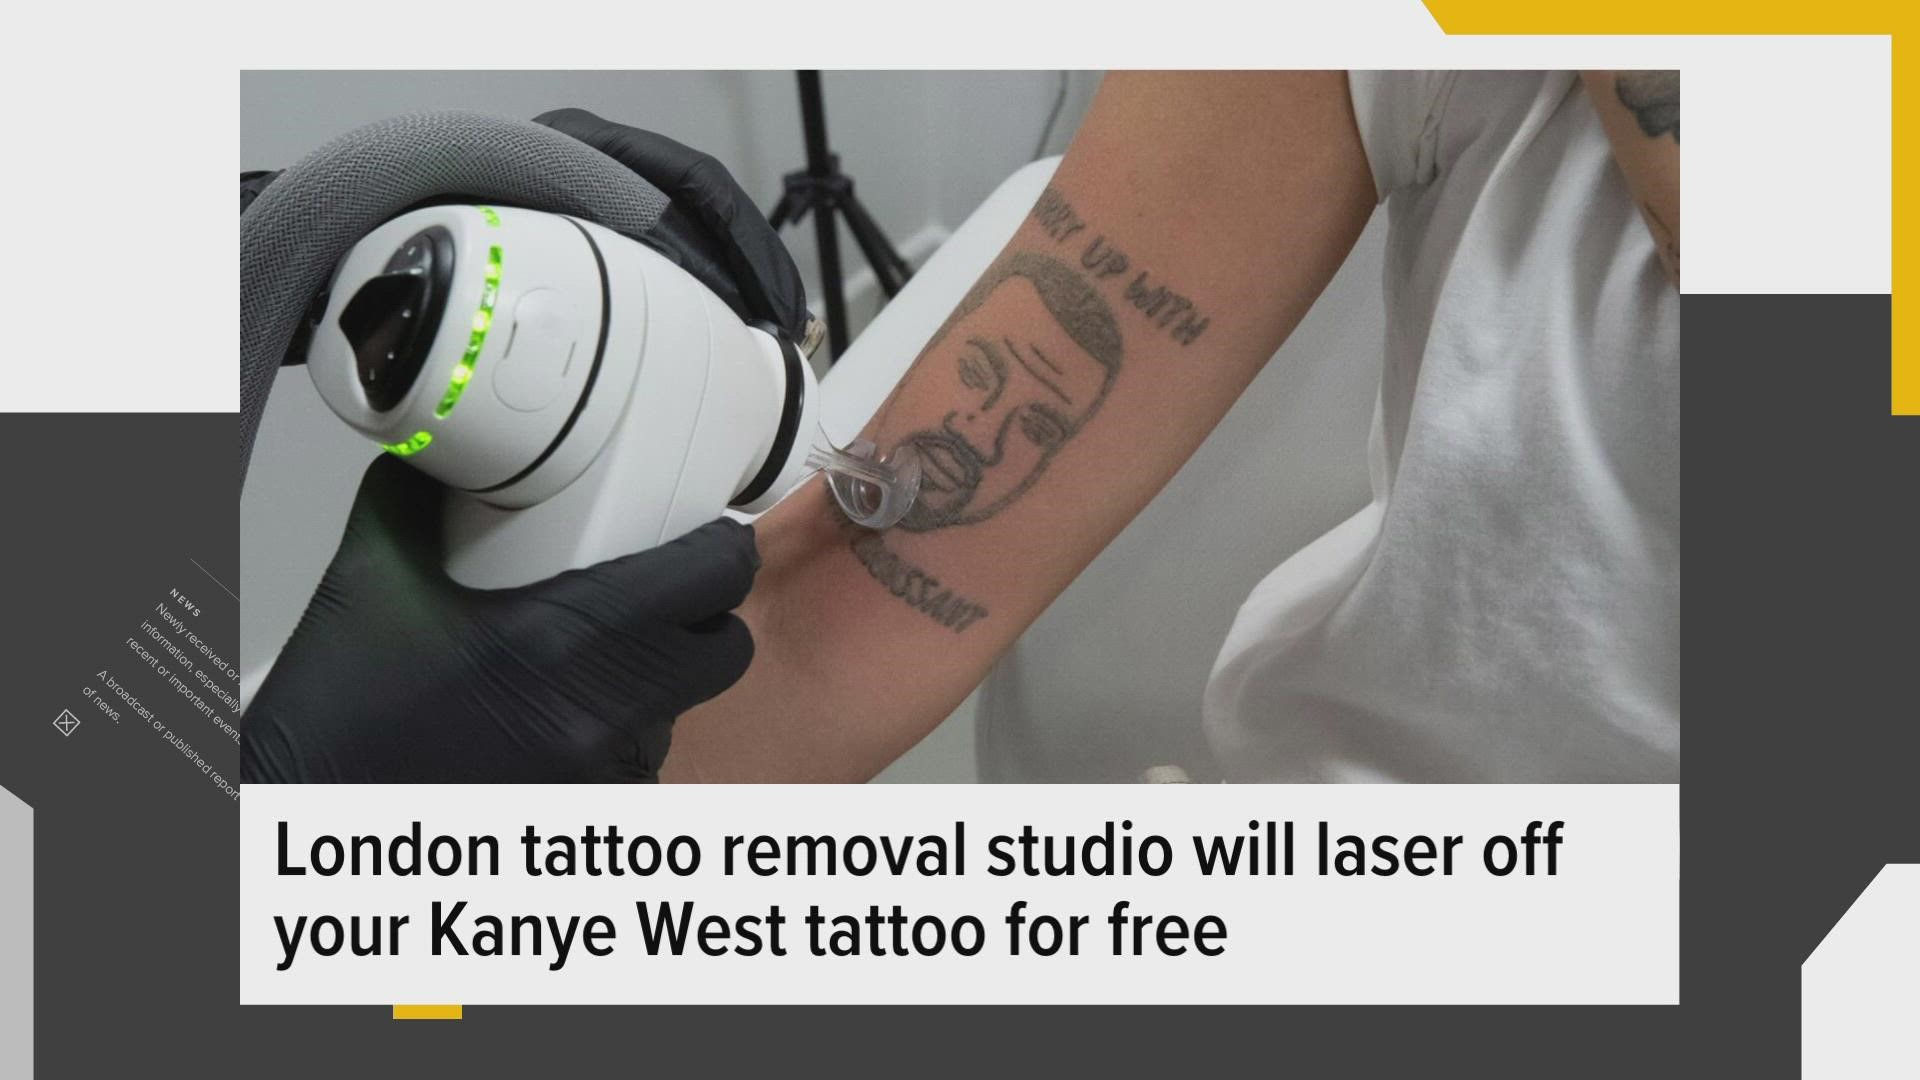 This tattoo removal studio will laser off your Kanye West tattoo for free |  CNN